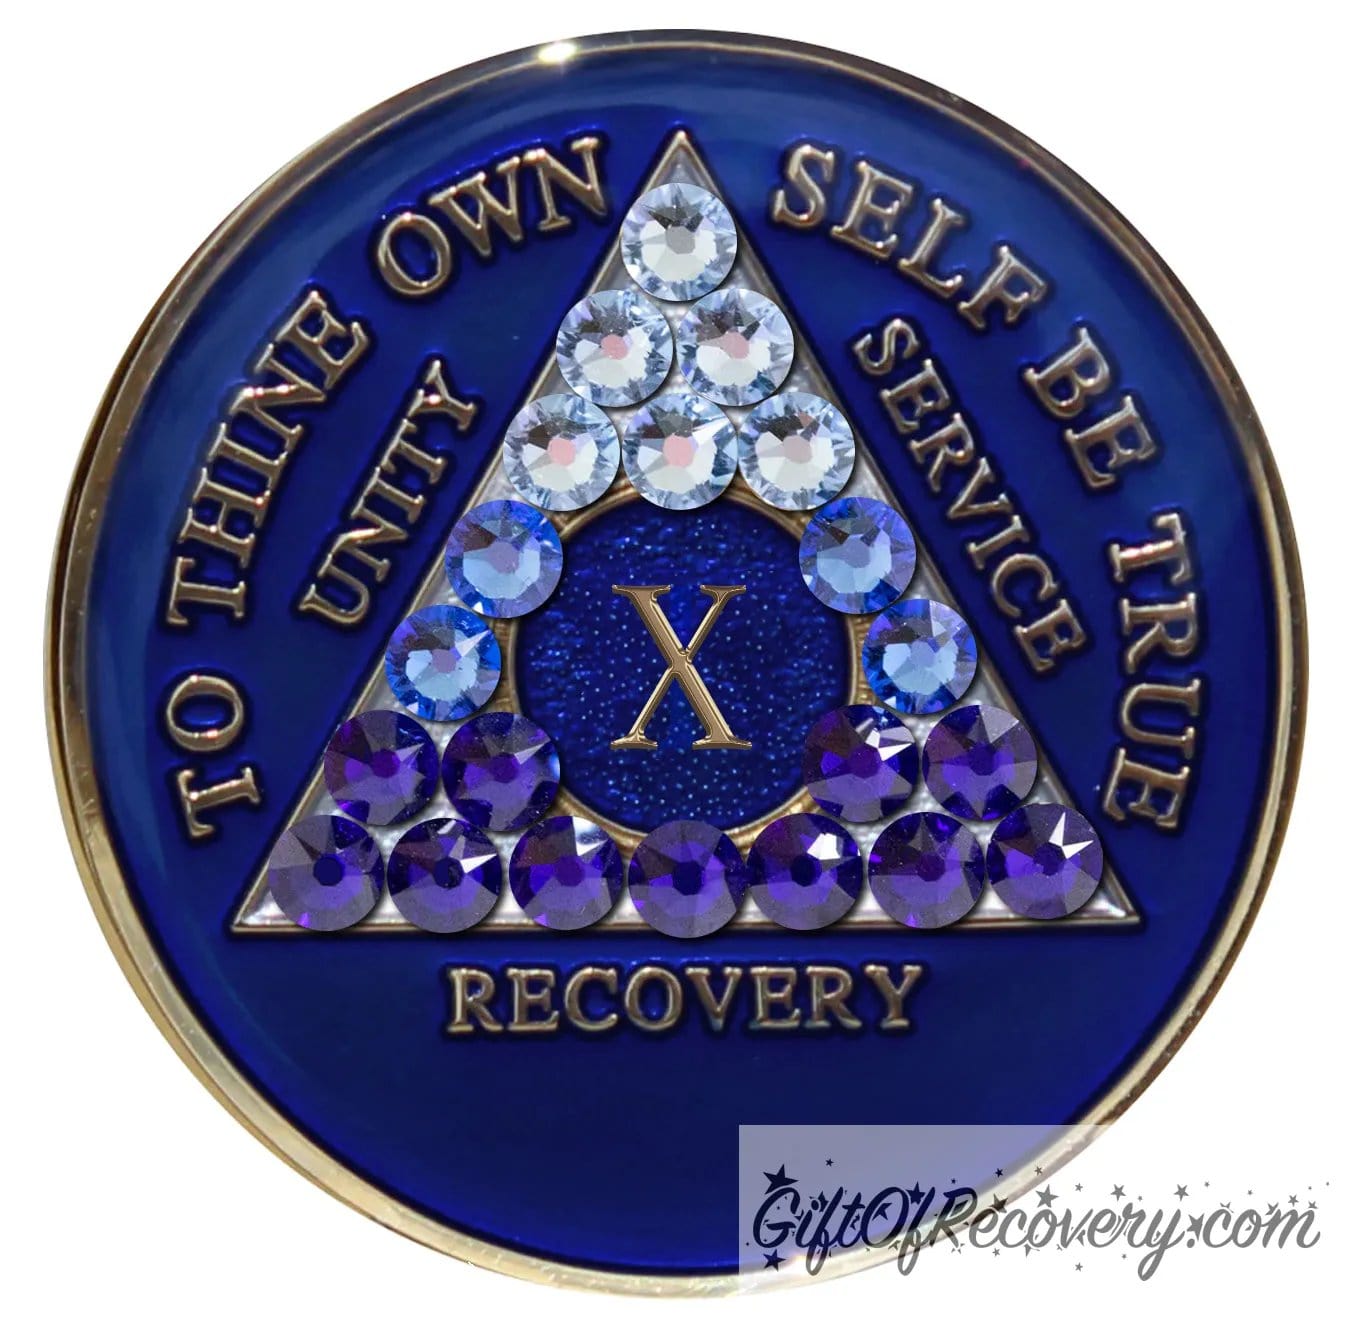 10 year Big Book Blue AA medallion with 21 genuine crystals forming the triangle, going from light to dark blue to represent transitions in your recovery journey, the center circle is blue sparkle, with the roman numeral, AA moto and rim in 14k gold plated brass and resin sealed for a glossy finish.